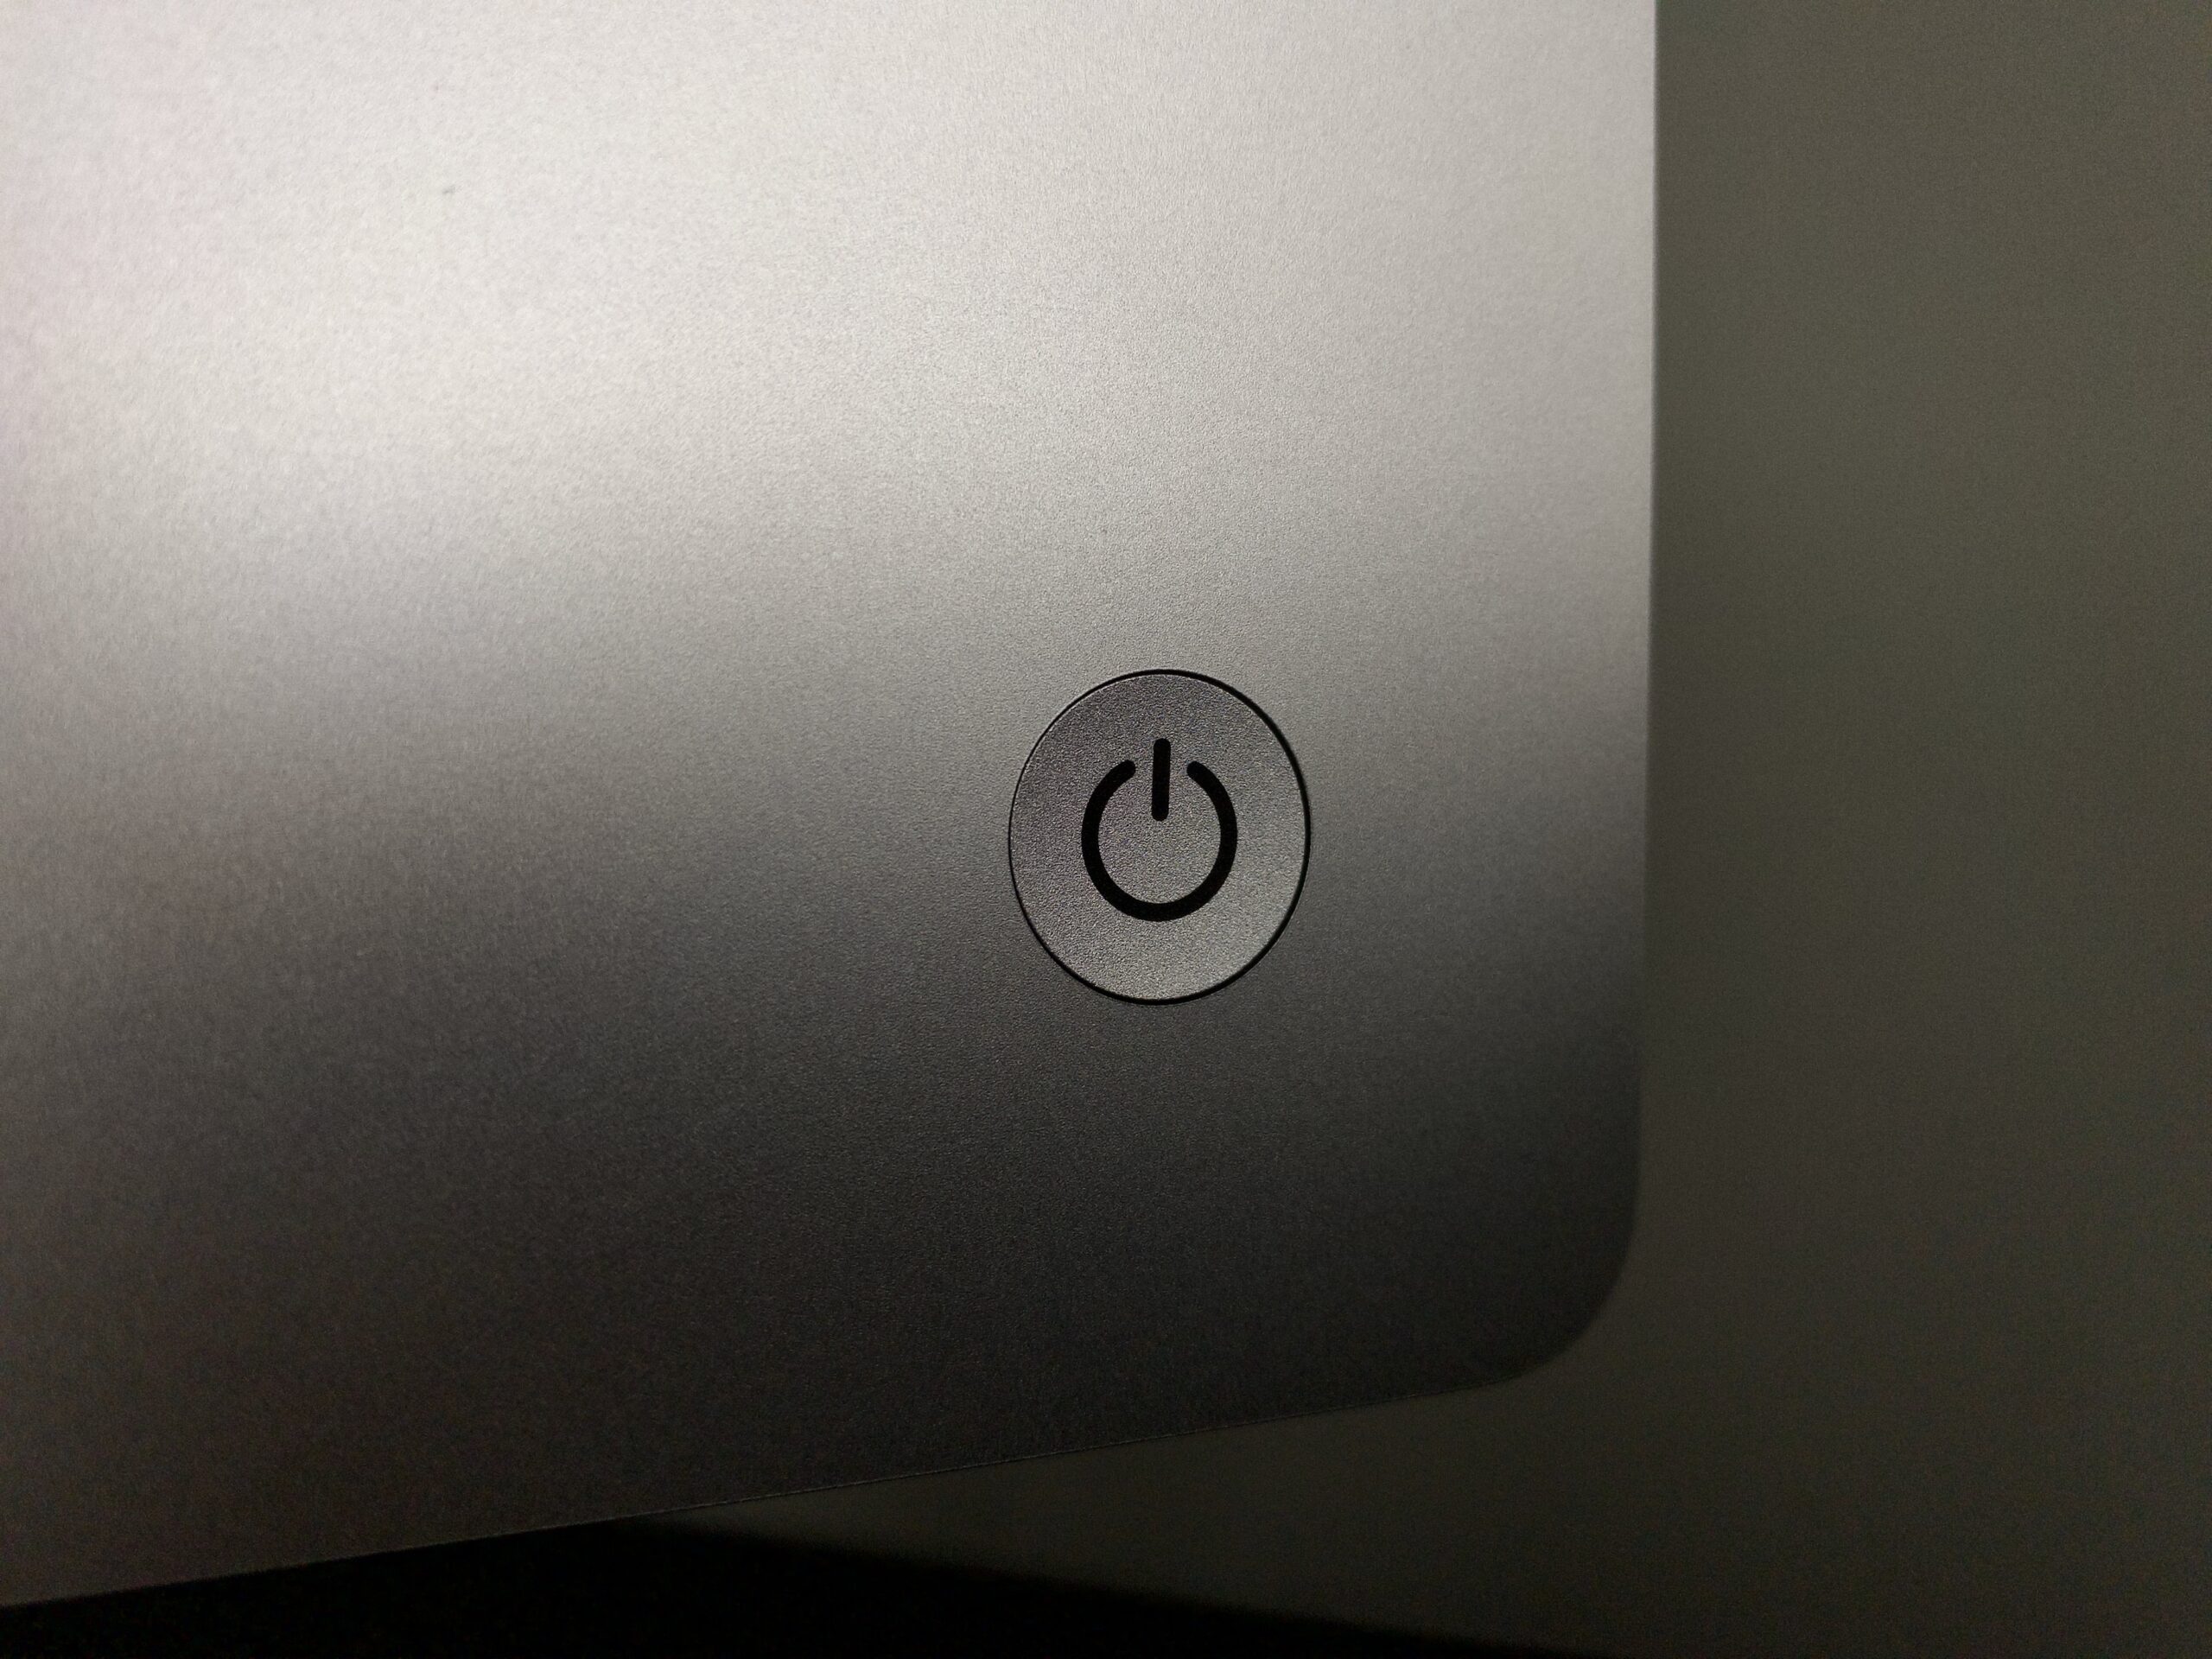 Power button of a device